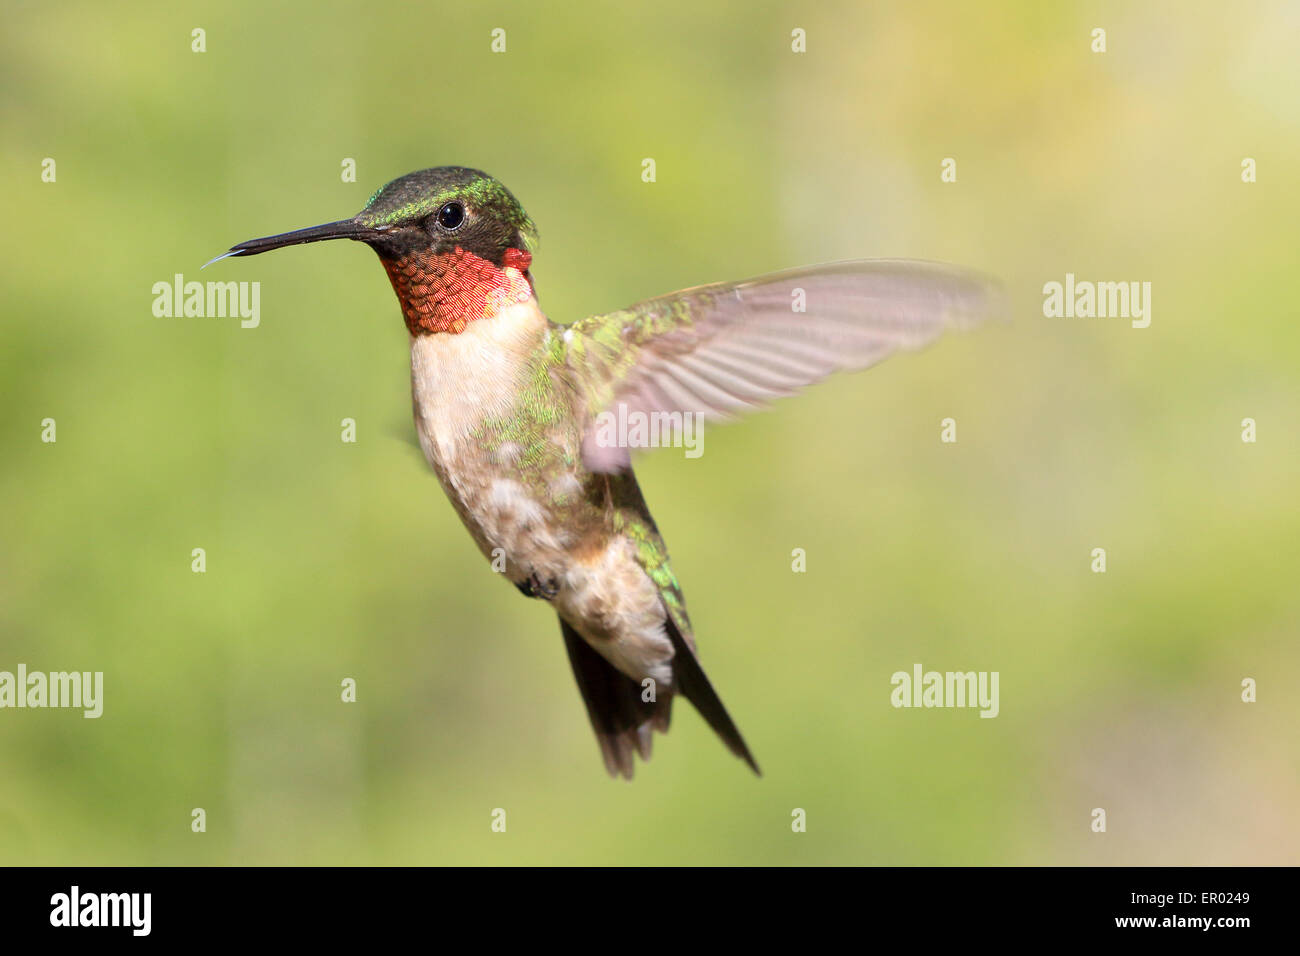 Hummingbird ruby-throated, Archilochus colubris, male flying and displaying red throat. Stock Photo